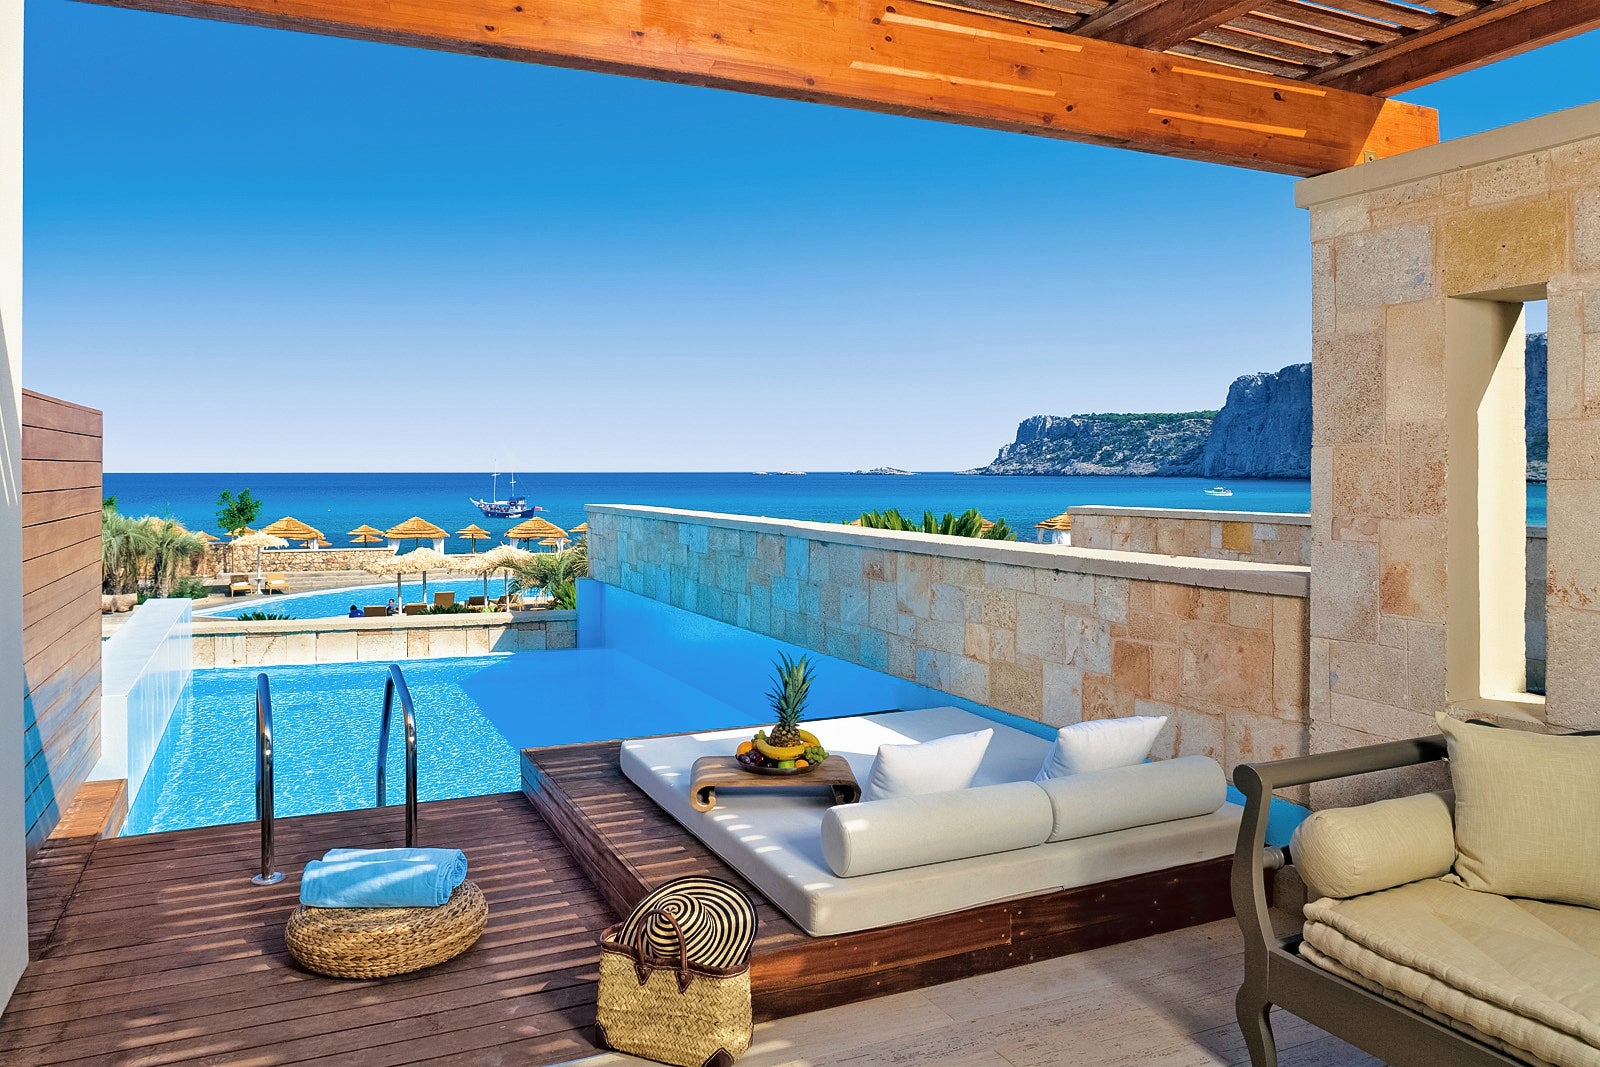 Enjoy majestic sea views during your stay at Rhodes’ Aquagrand Exclusive Deluxe Resort